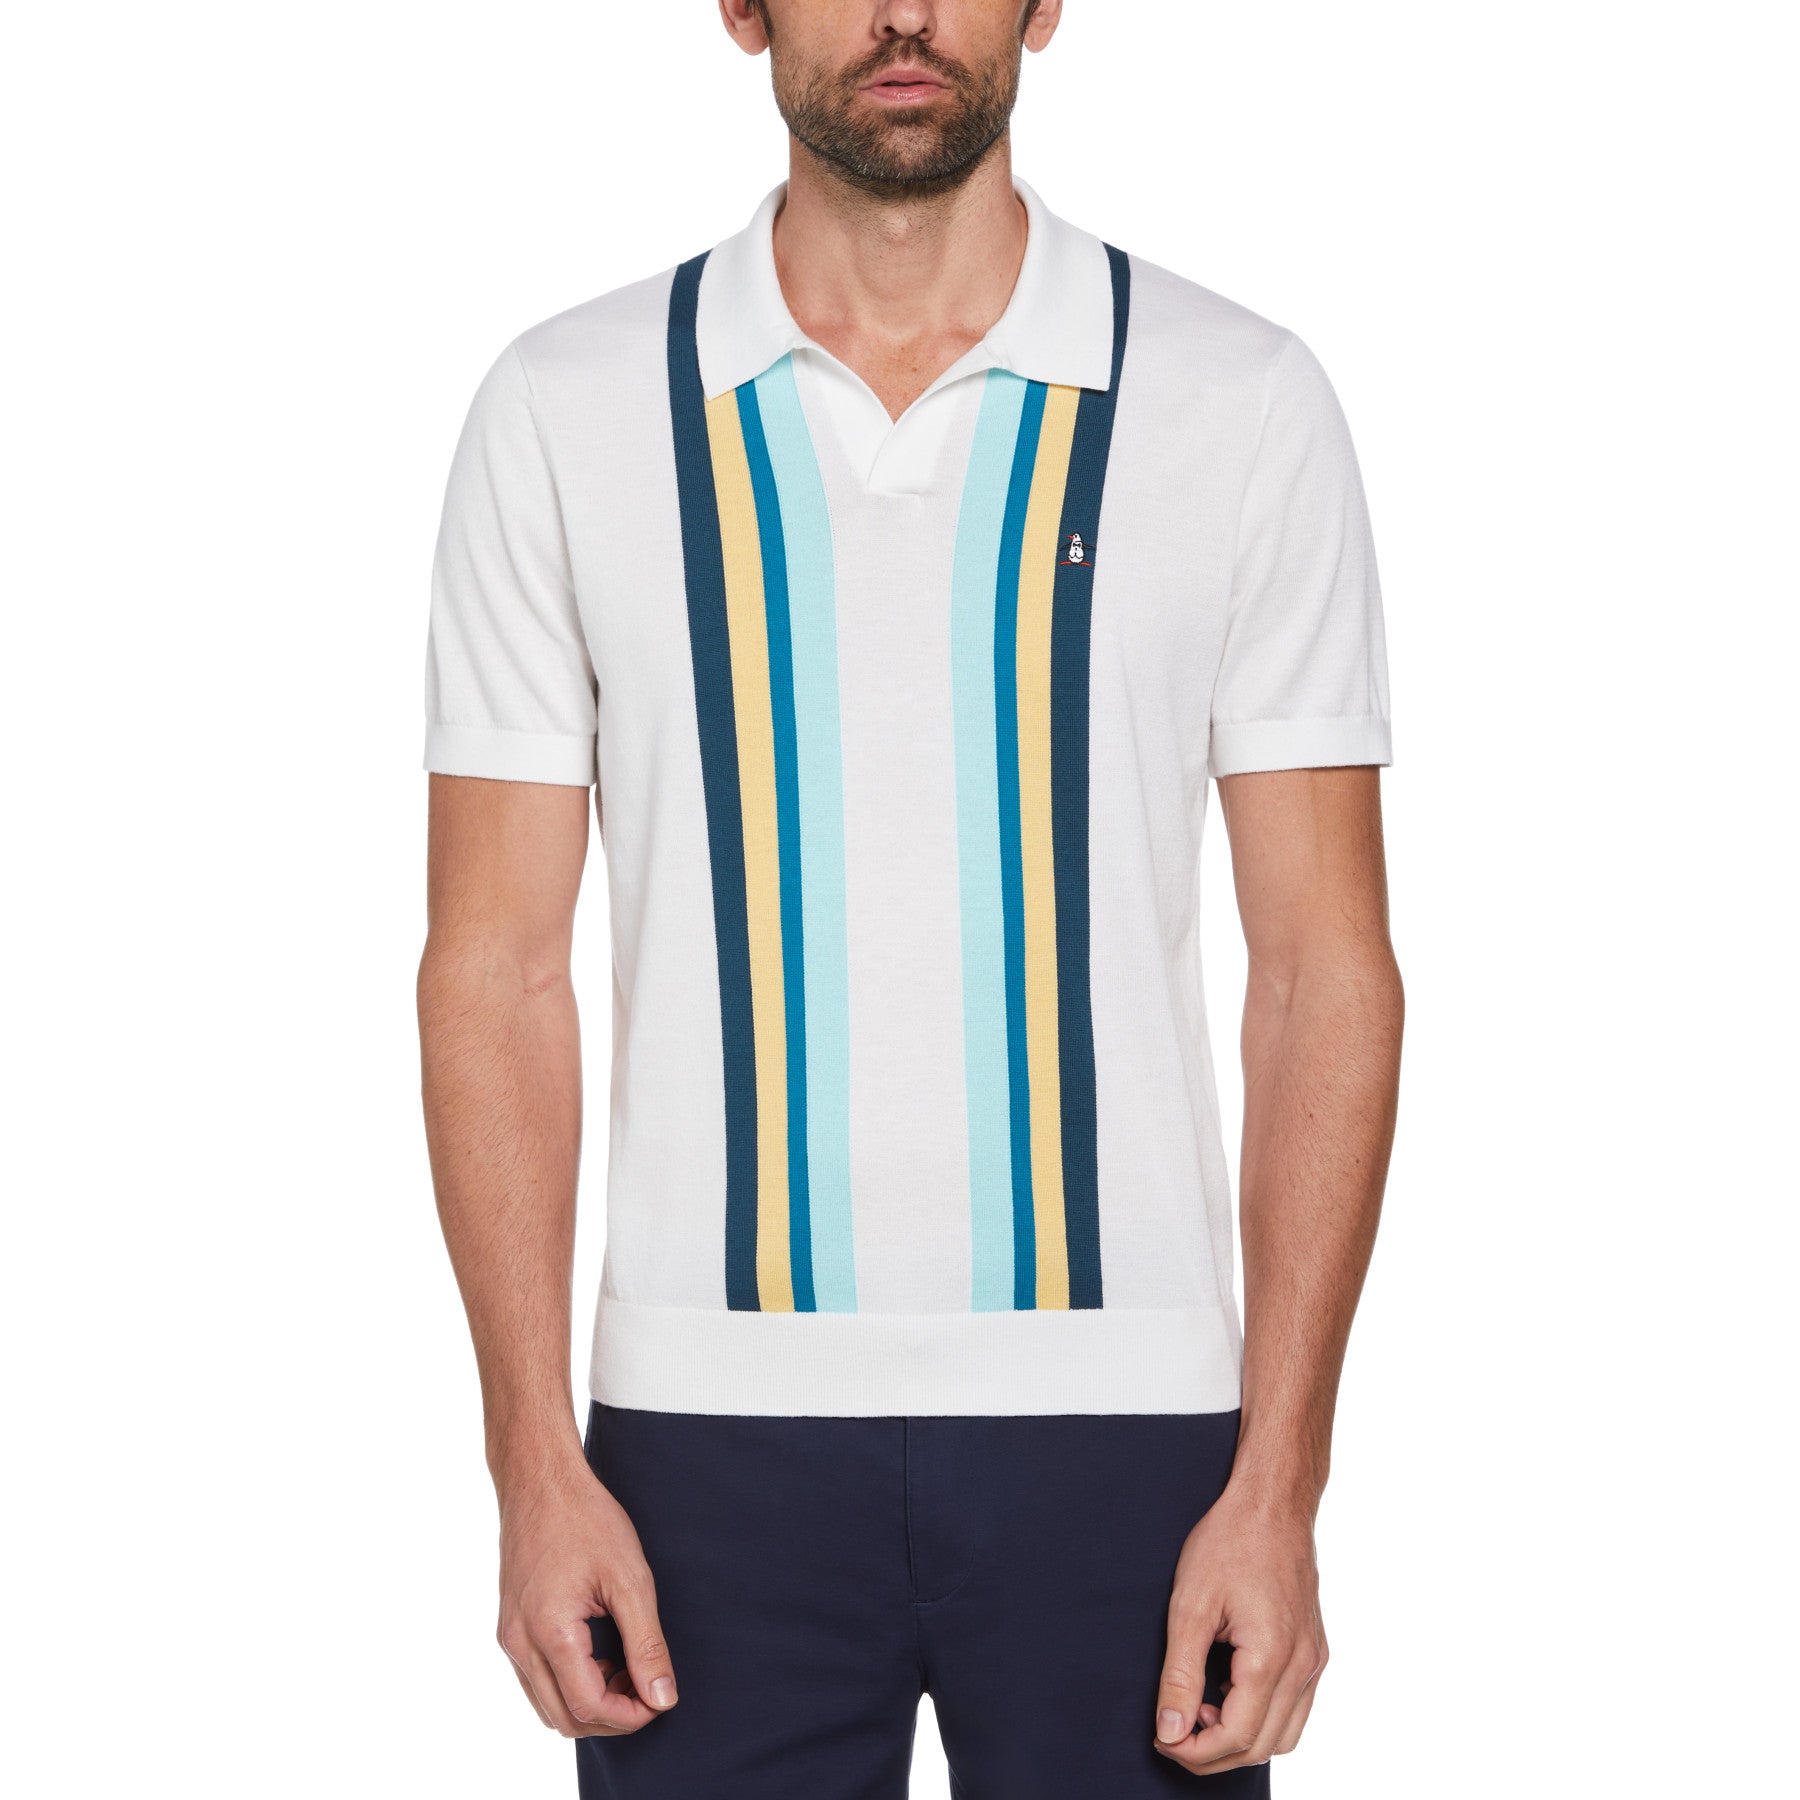 View Icons Short Sleeve Textured Vertical Stripe Polo Jumper In Bright Whit information